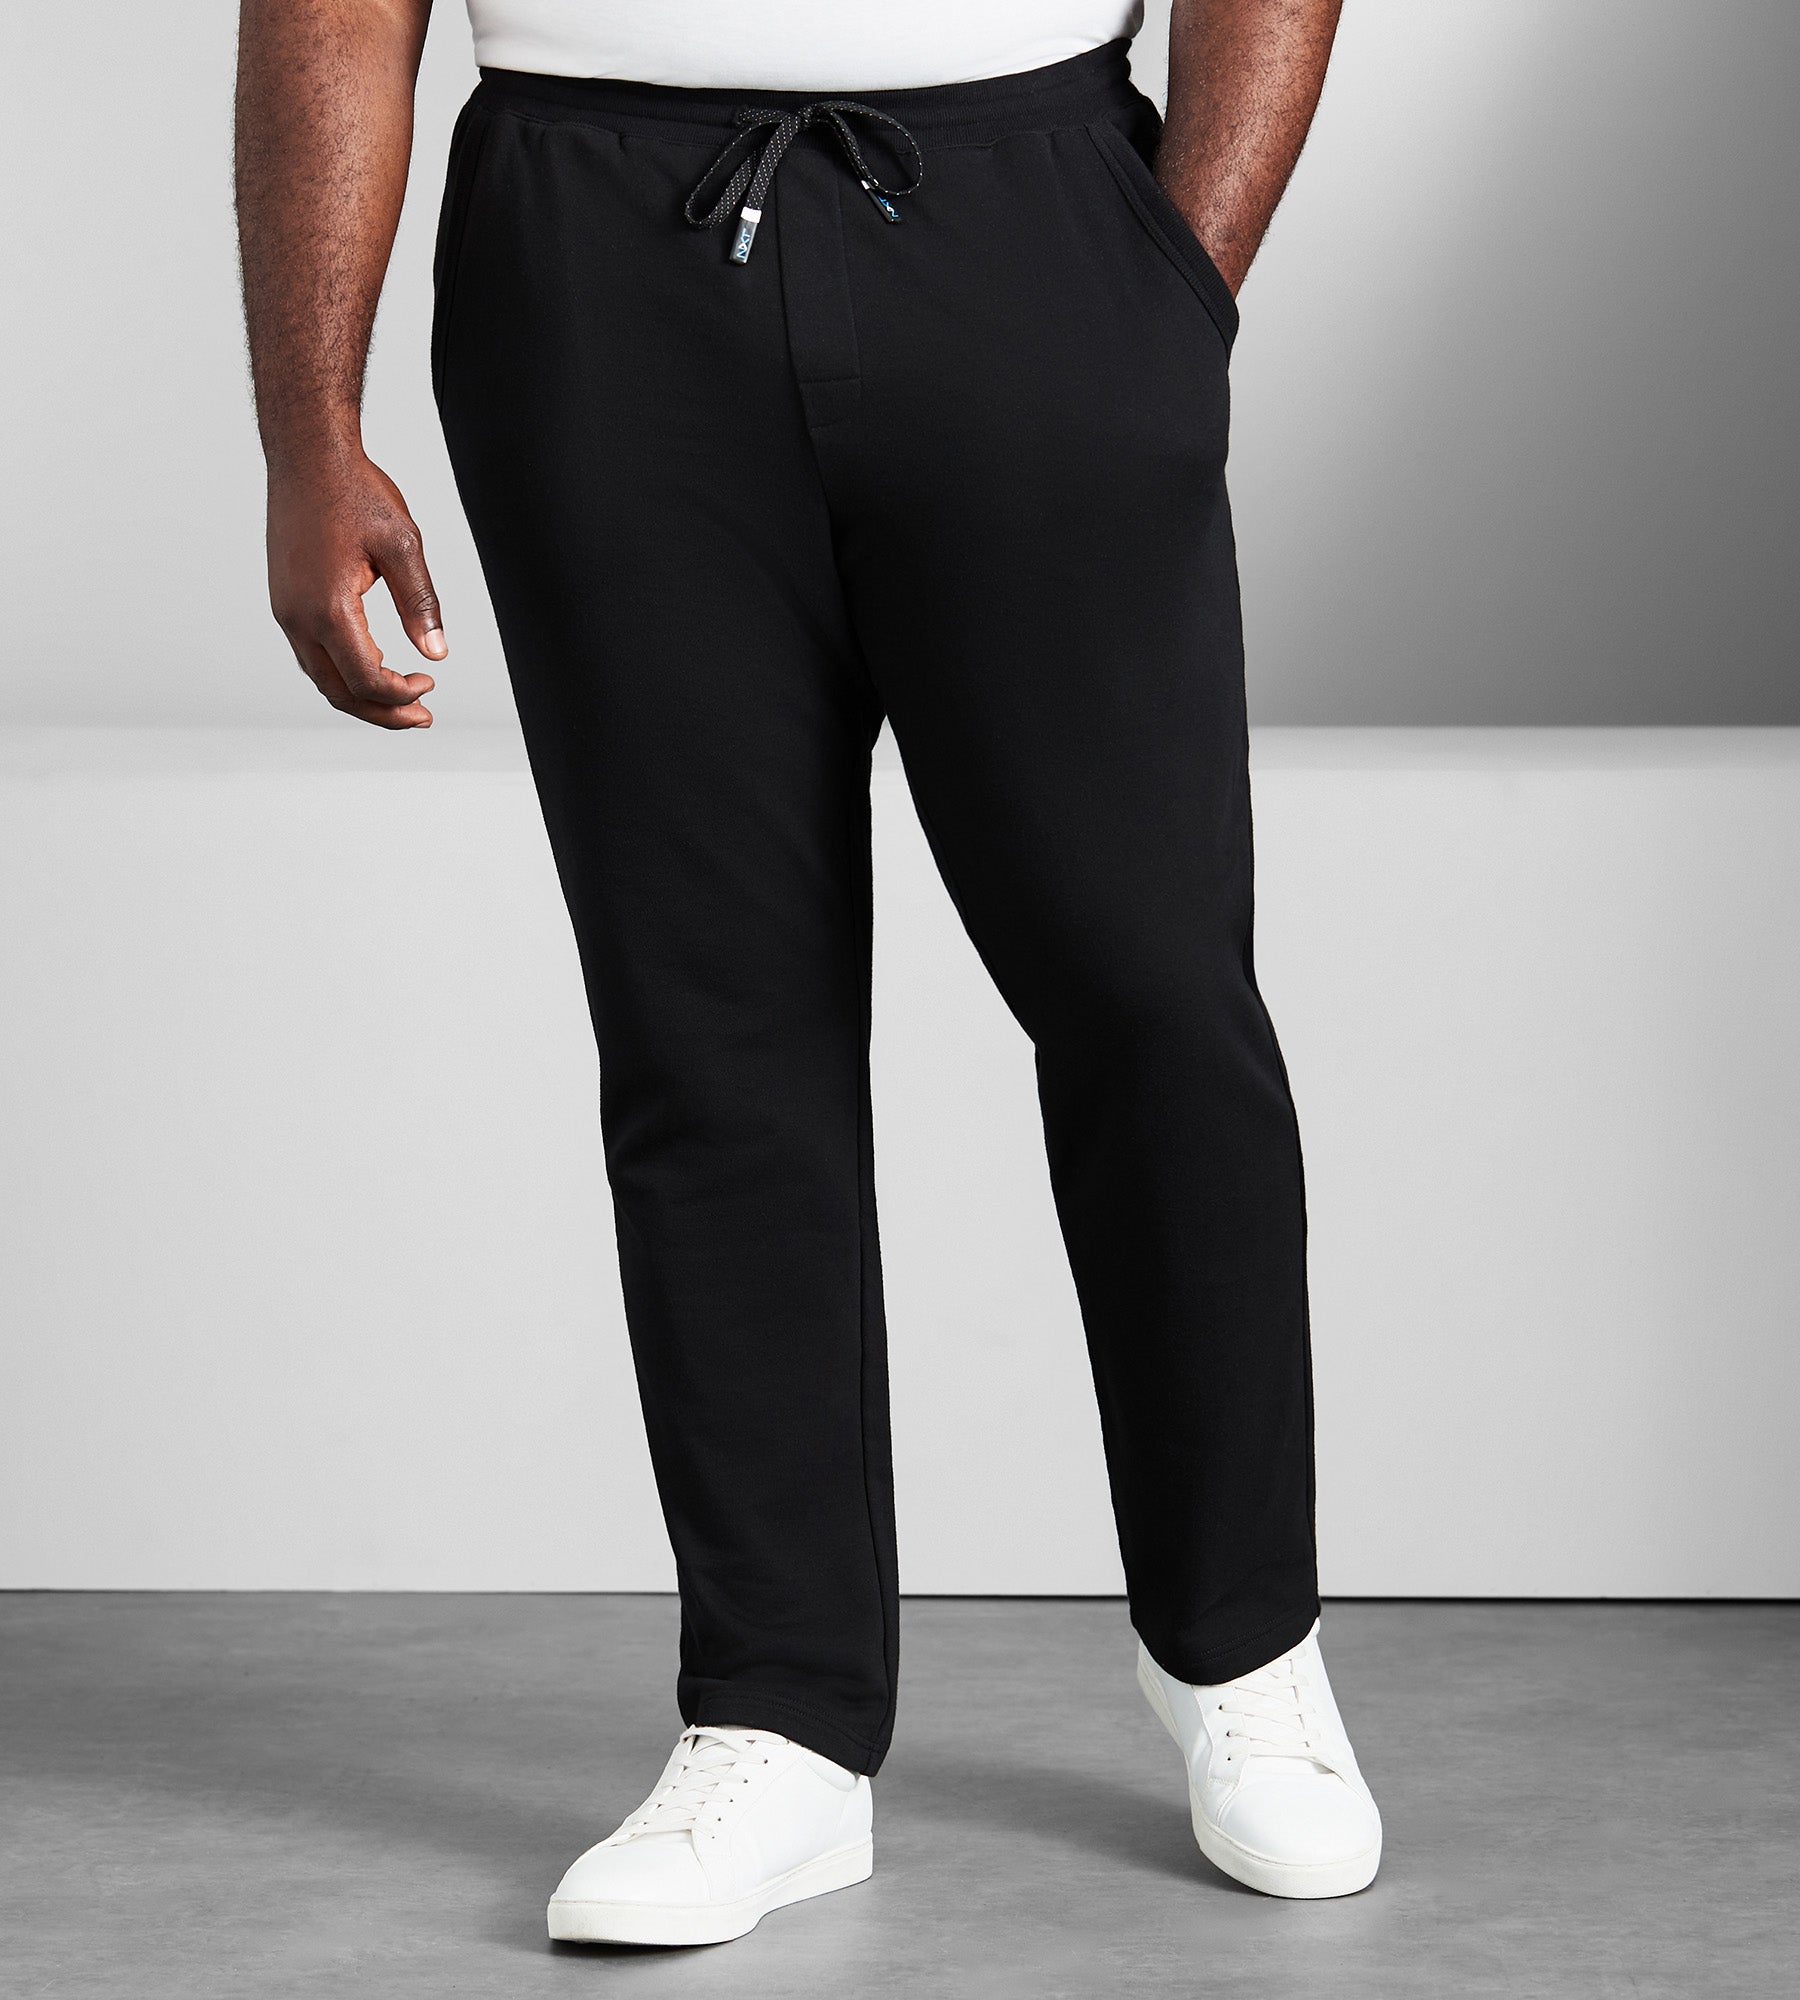 ALL SZN French Terry Pants - Black, Men's Training